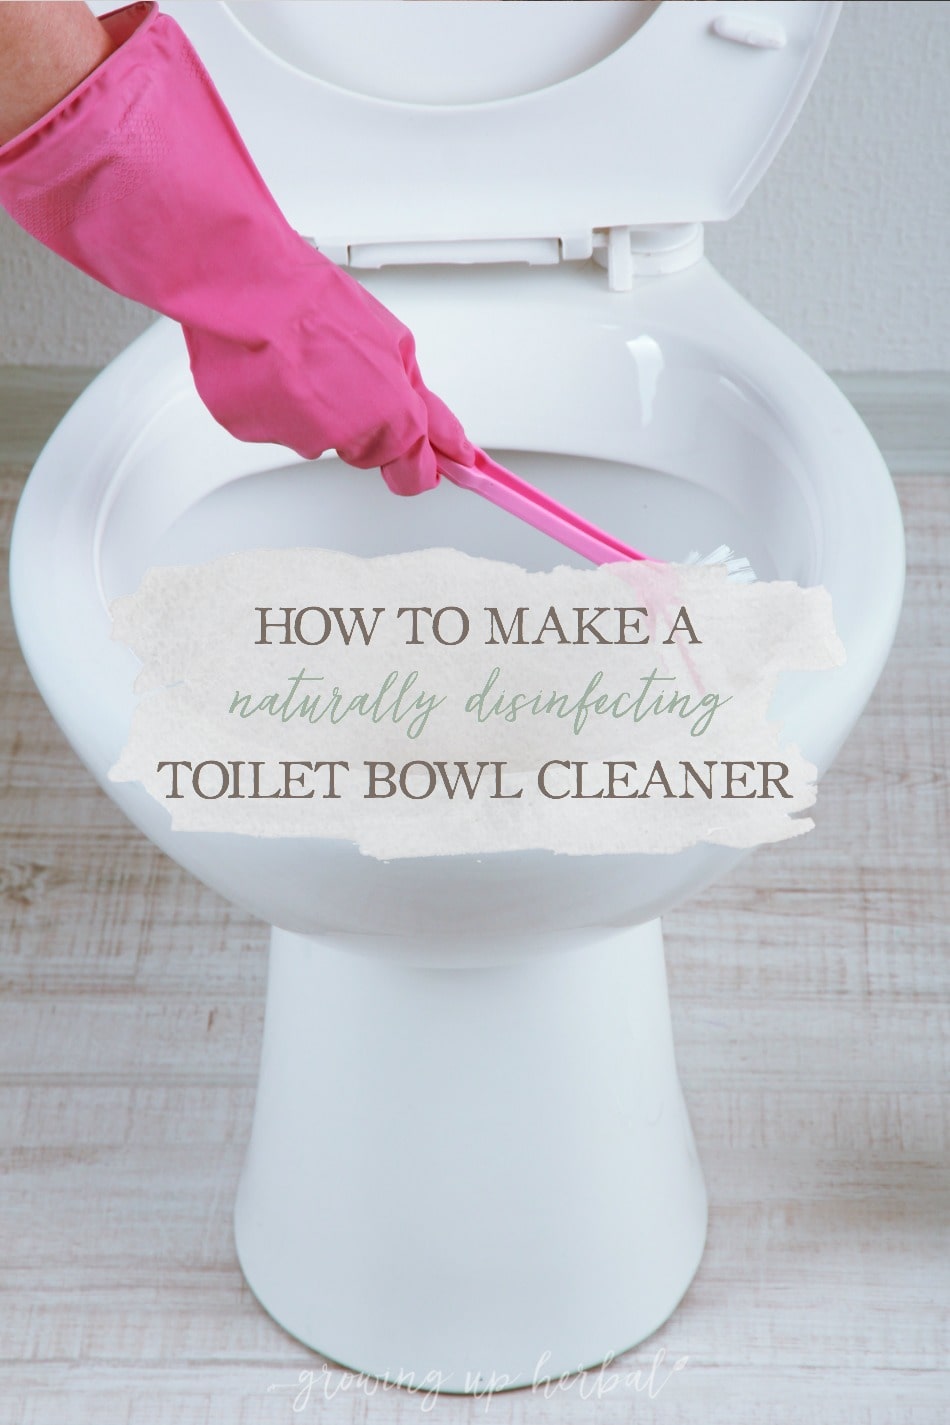 How To Make A Naturally Disinfecting Toilet Bowl Cleaner | Growing Up Herbal | A simple DIY toilet bowl cleaner that will naturally disinfect nasty toilet bowls.